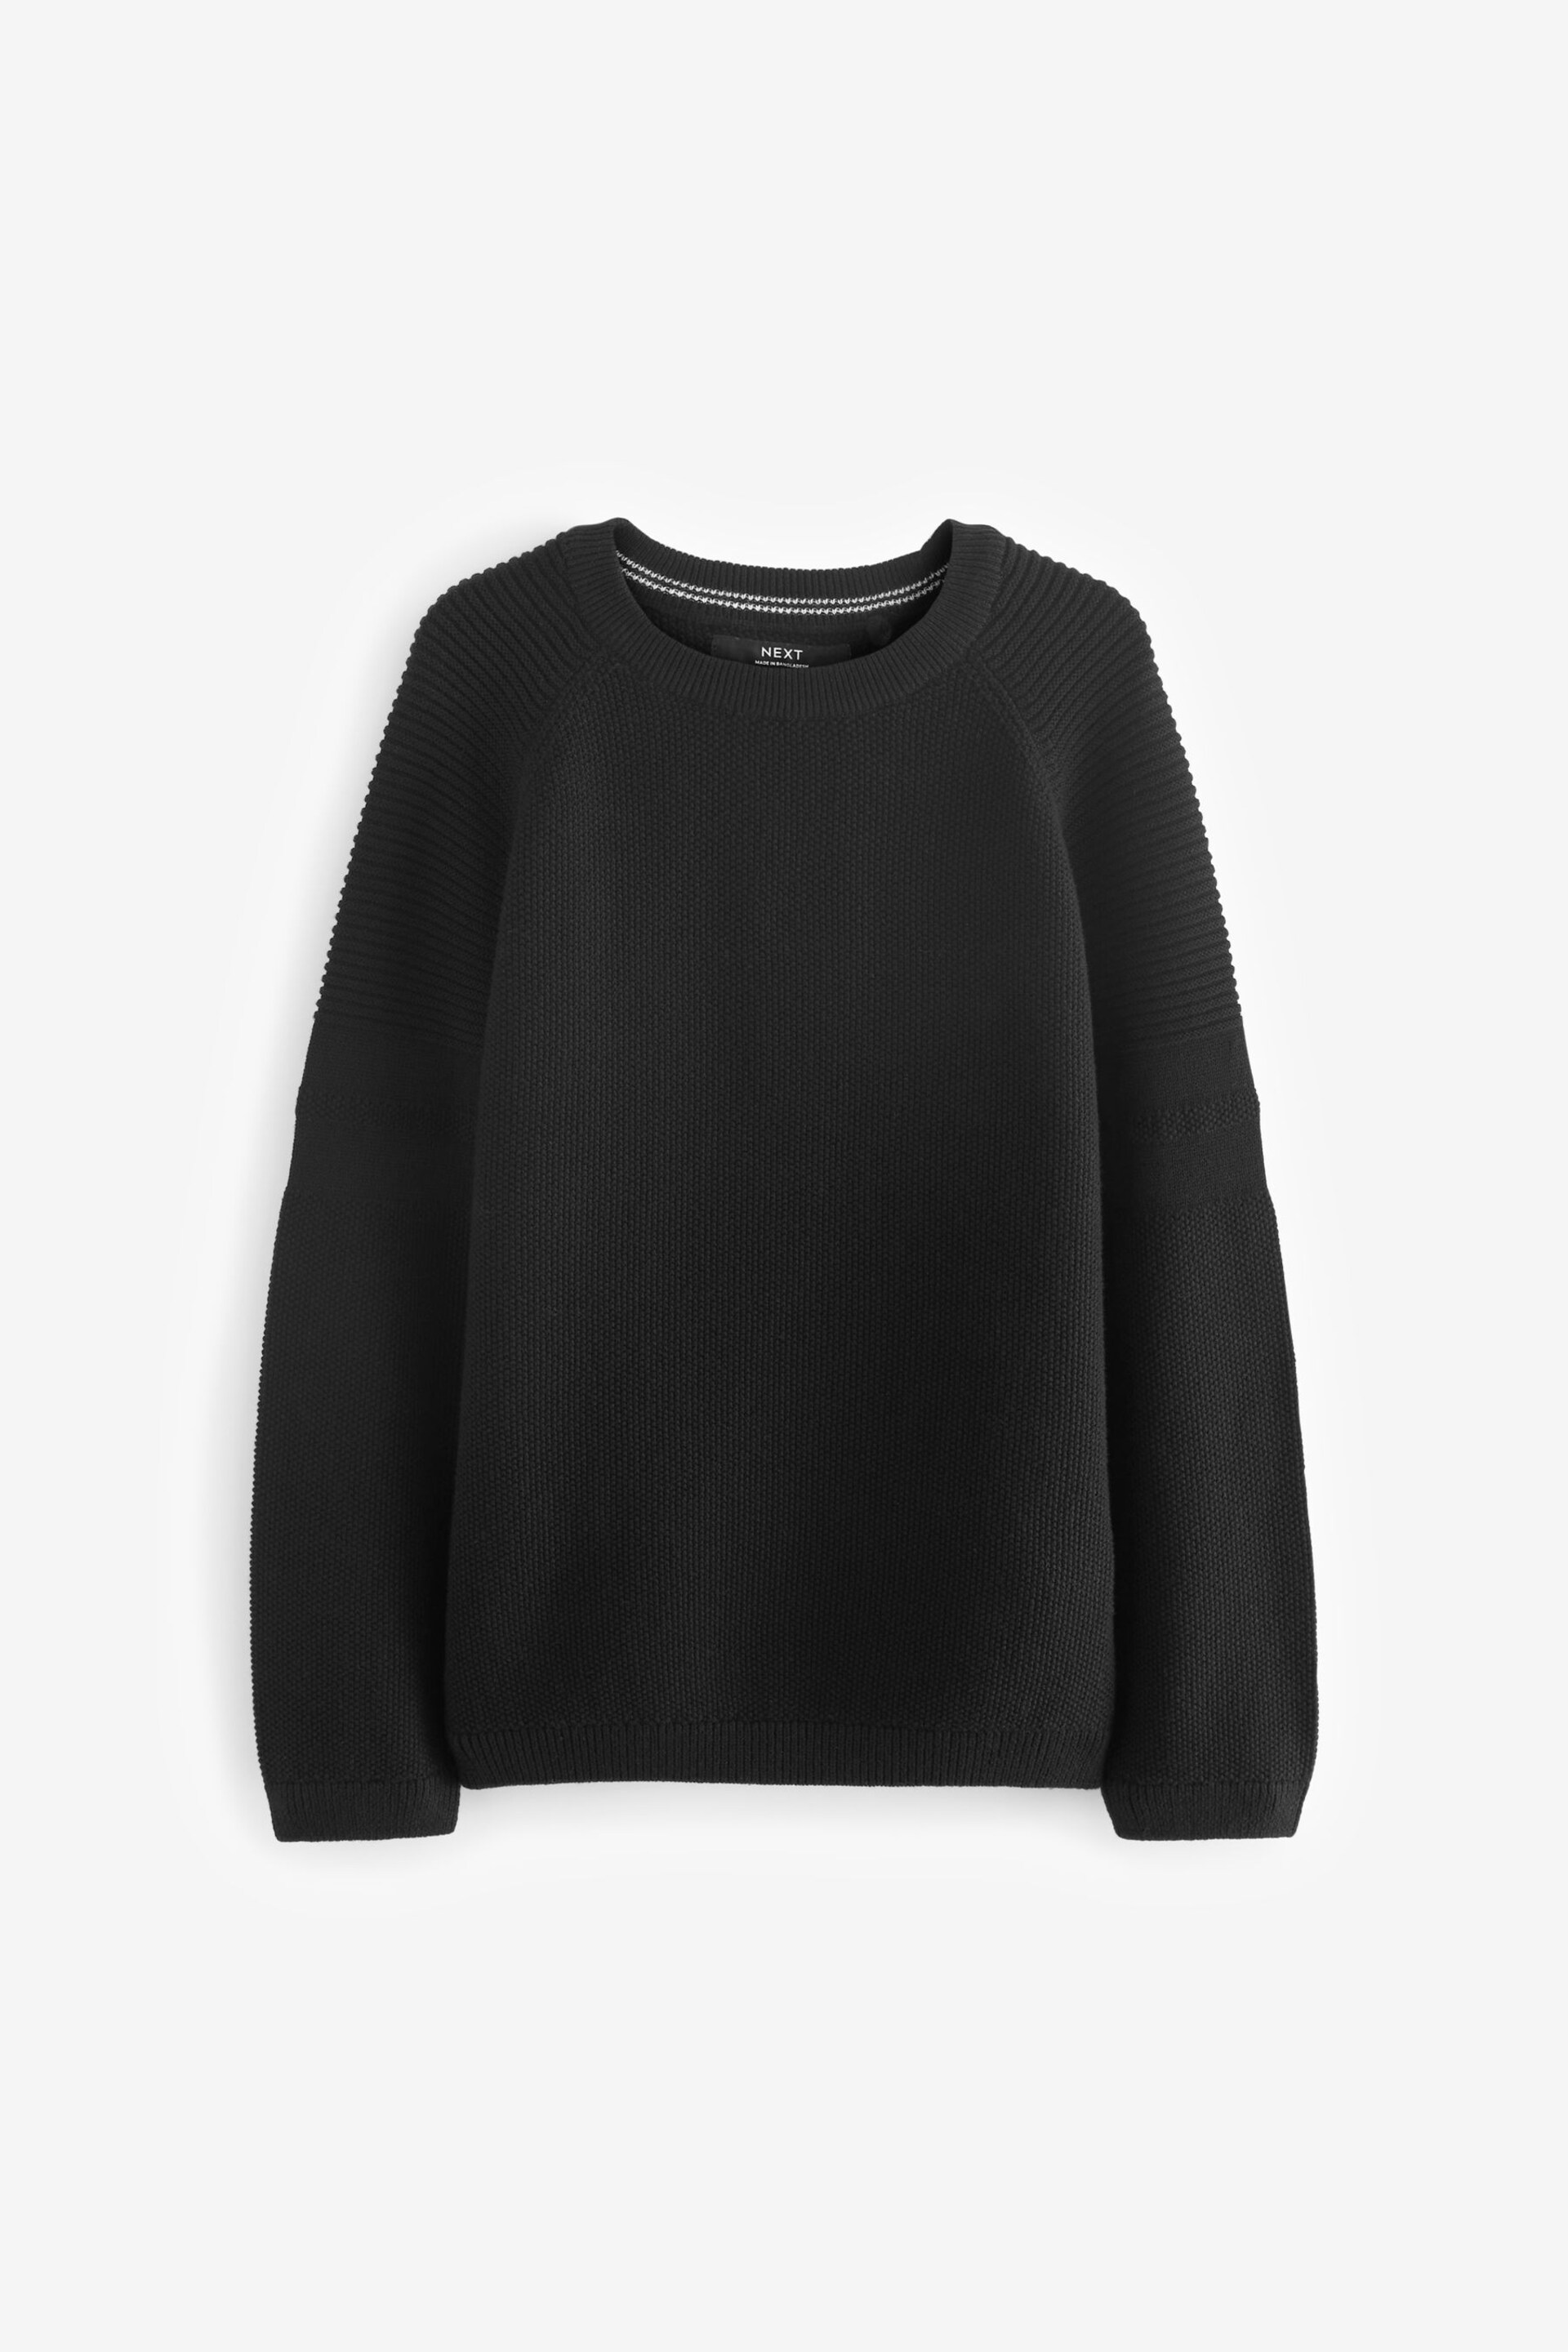 Black Without Stag Textured Crew Jumper (3-16yrs) - Image 1 of 3